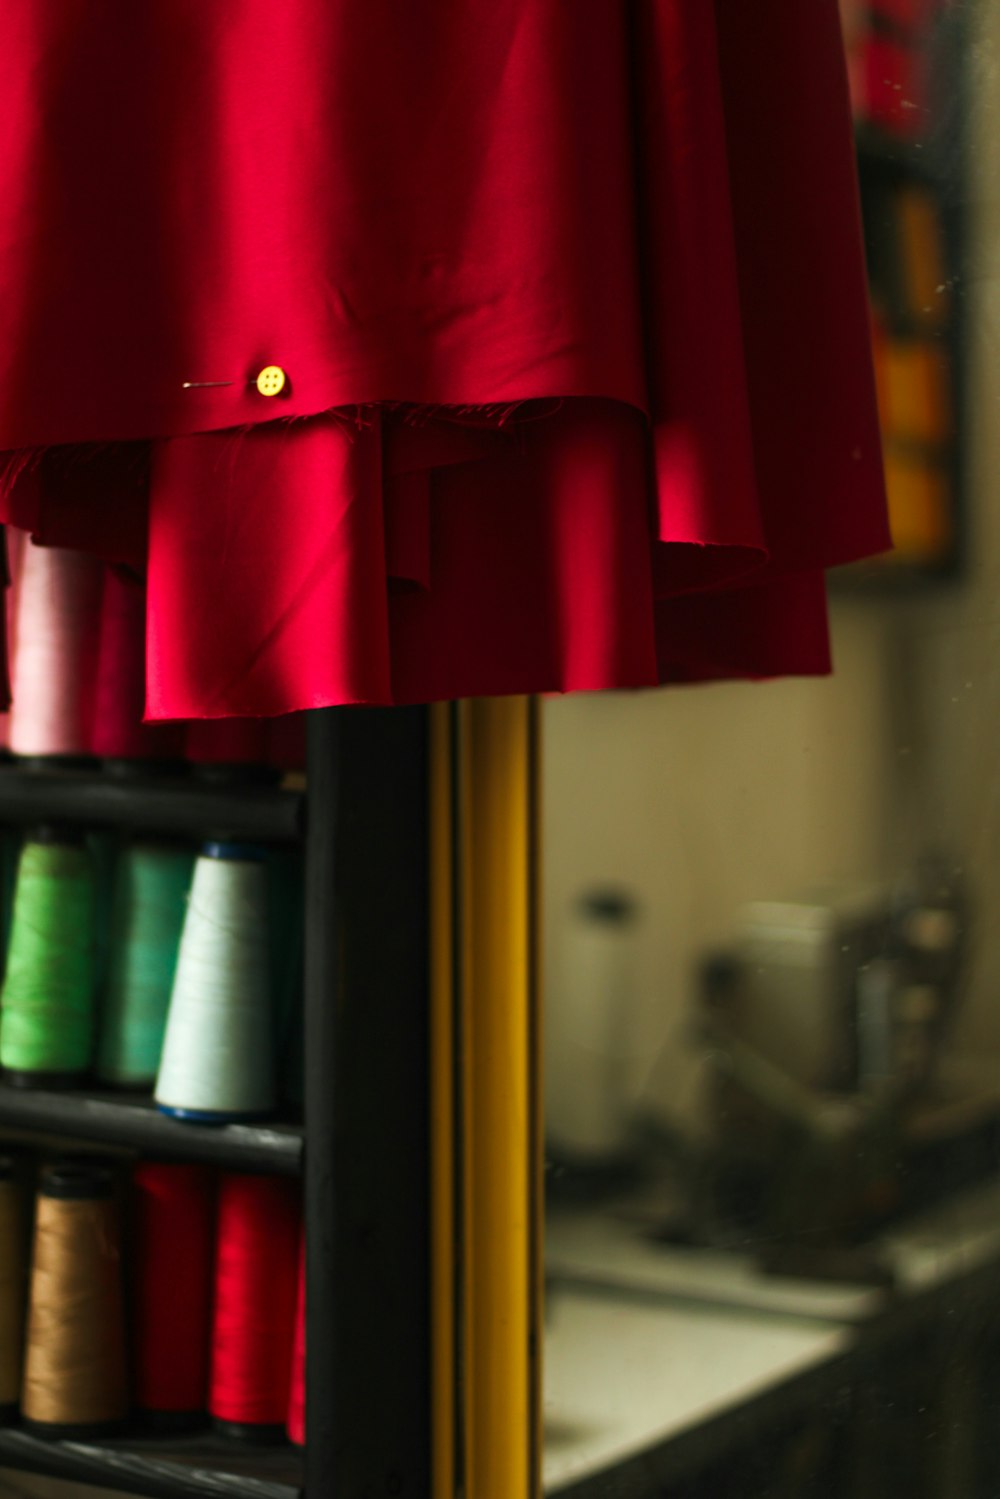 a red dress hanging on a rack with spools of thread